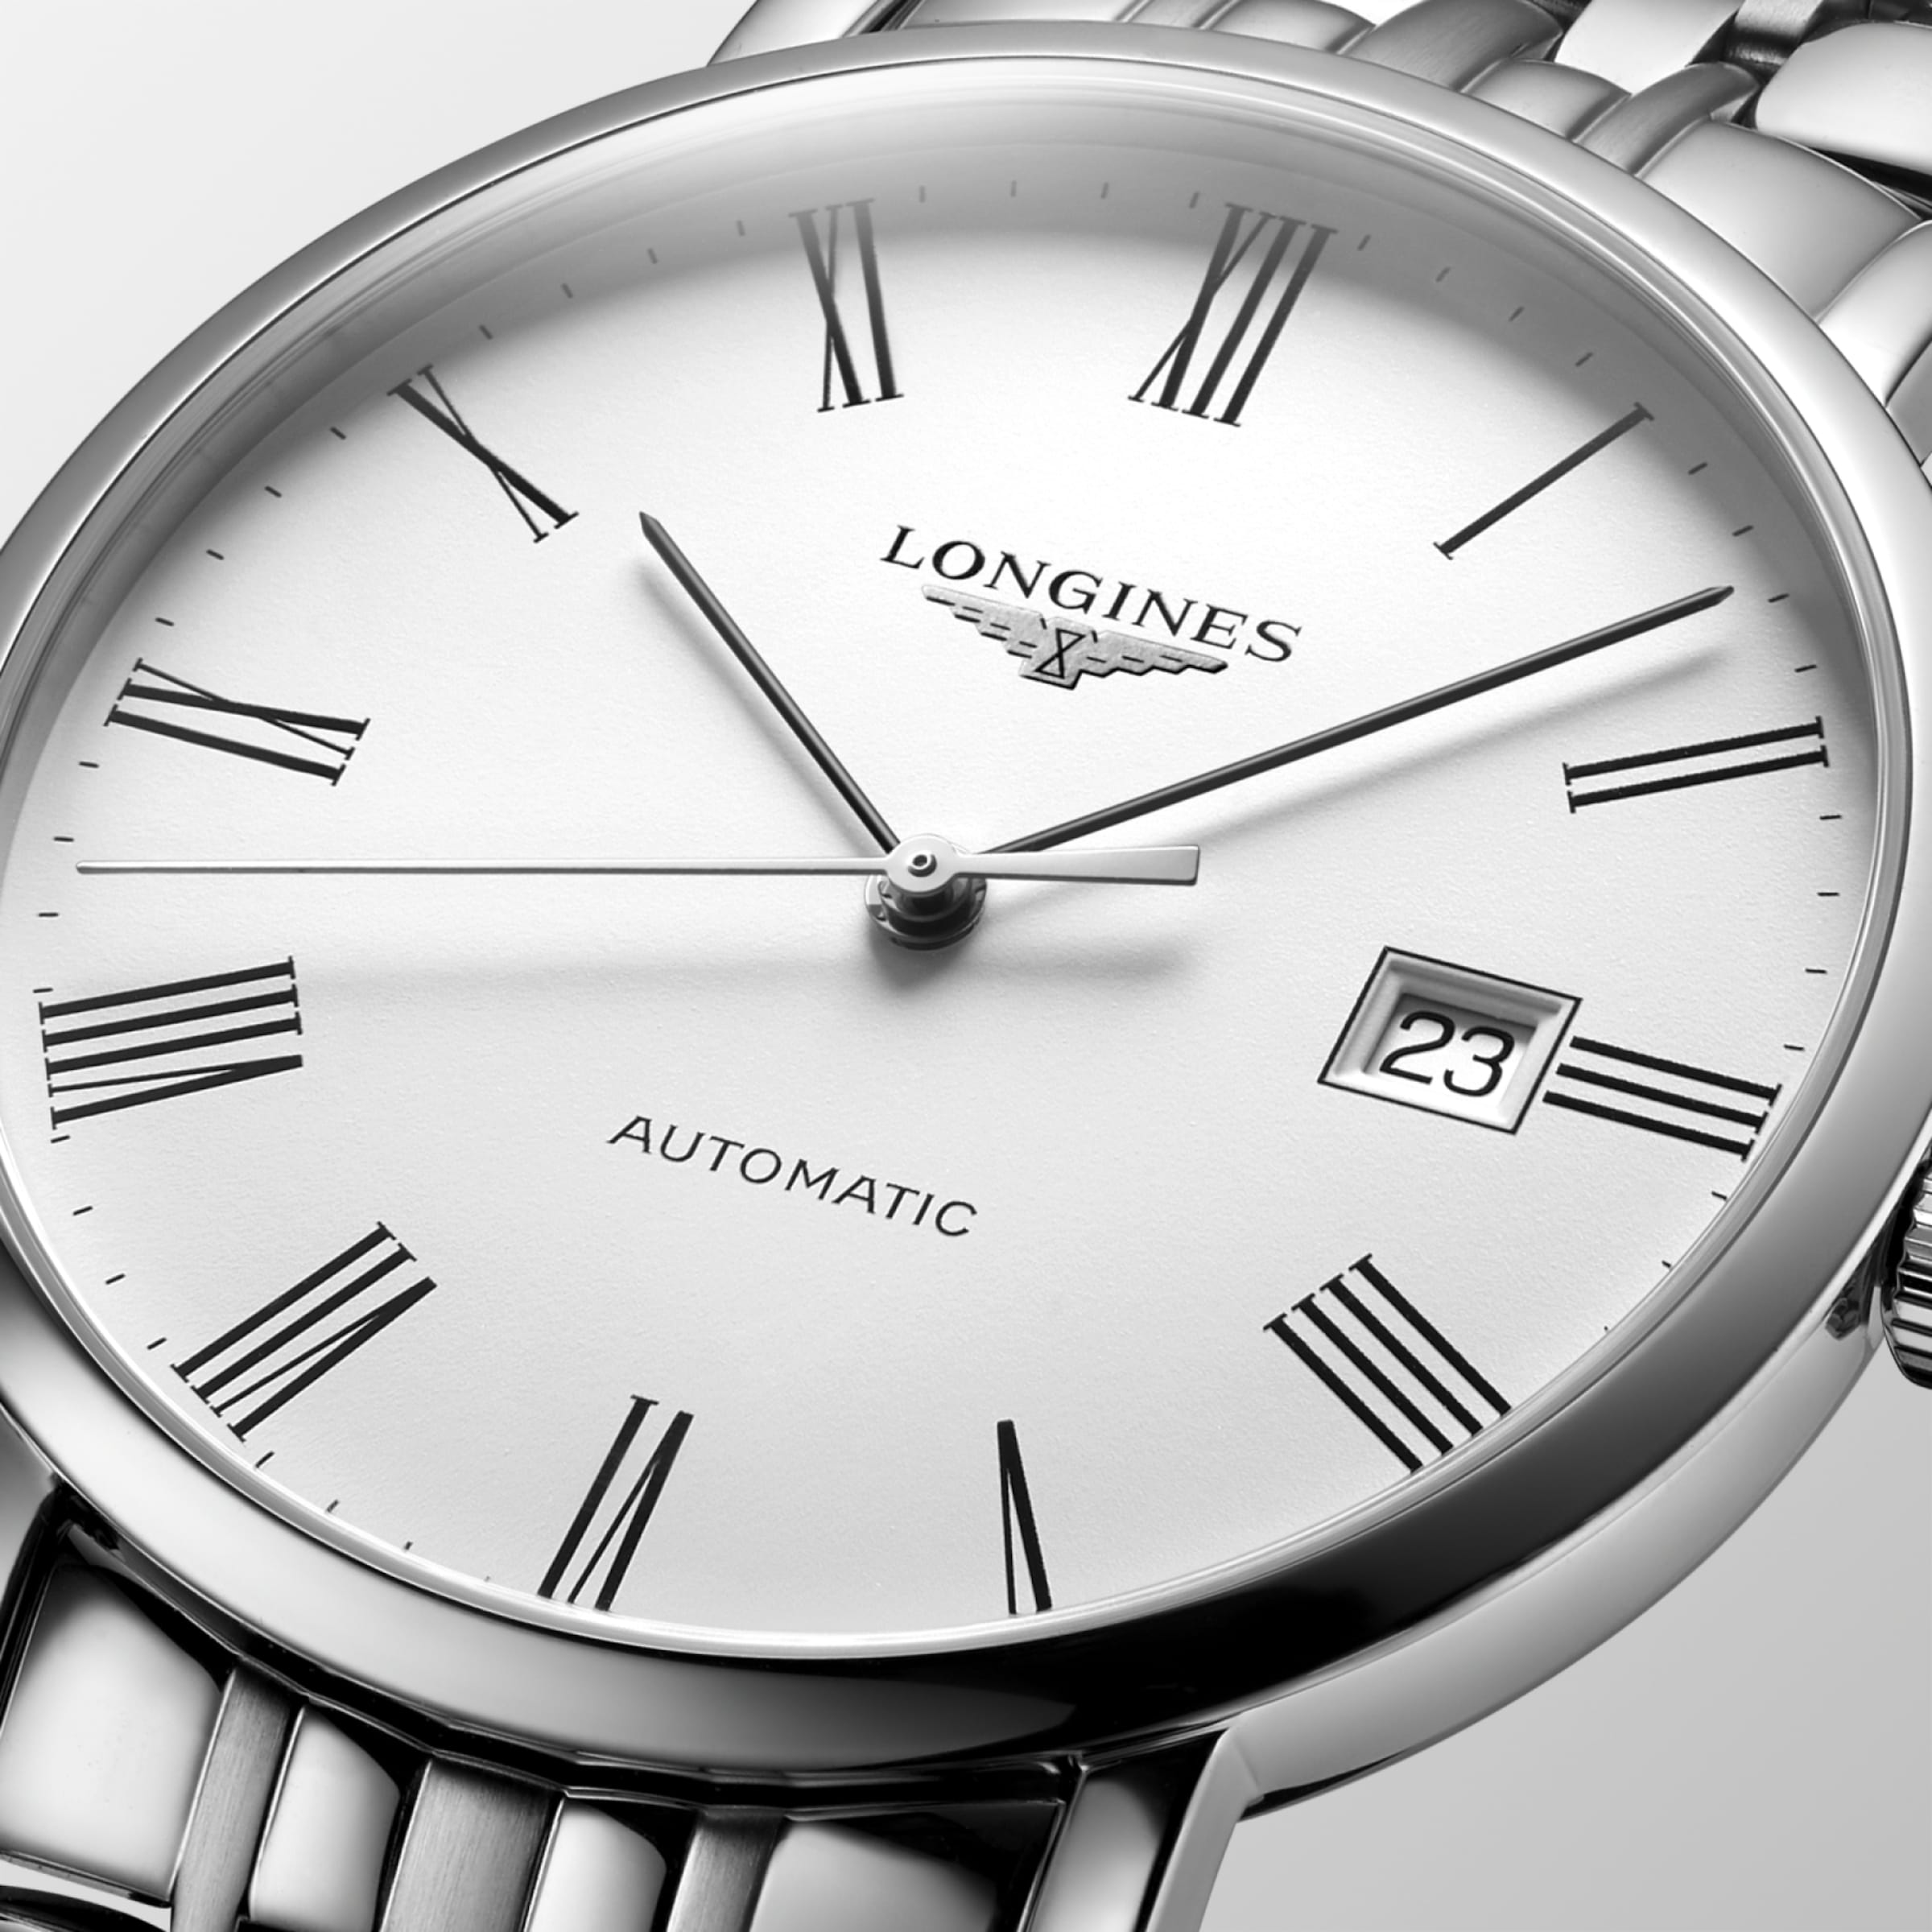 Longines ELEGANT COLLECTION Automatic Stainless steel Watch - L4.910.4.11.6